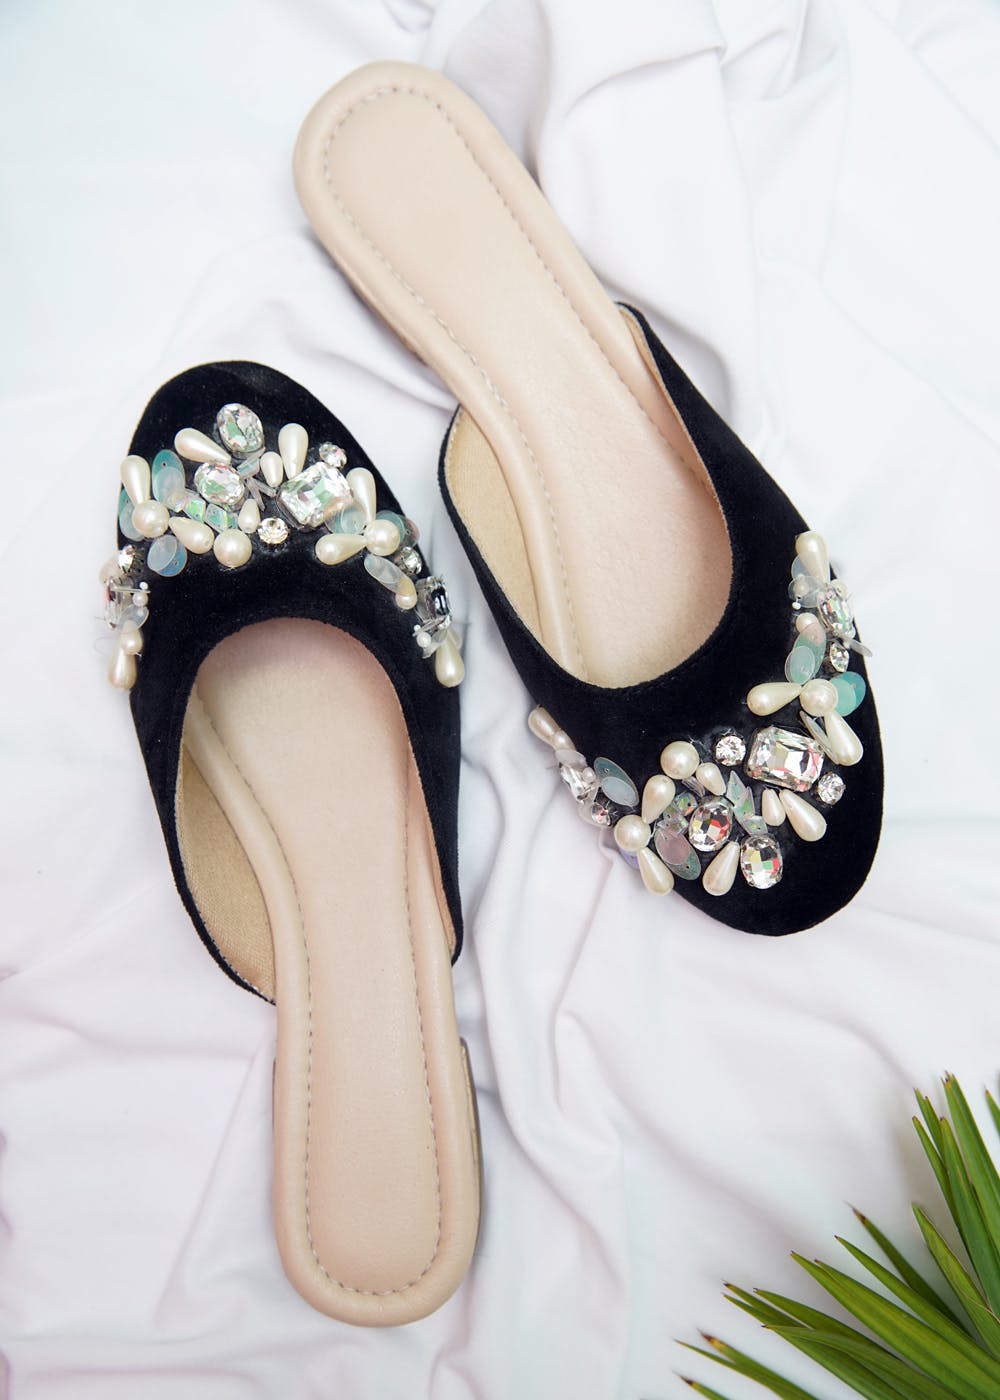 Get Chunky Multi Stone Embellished Black Mules at ₹ 1299 | LBB Shop